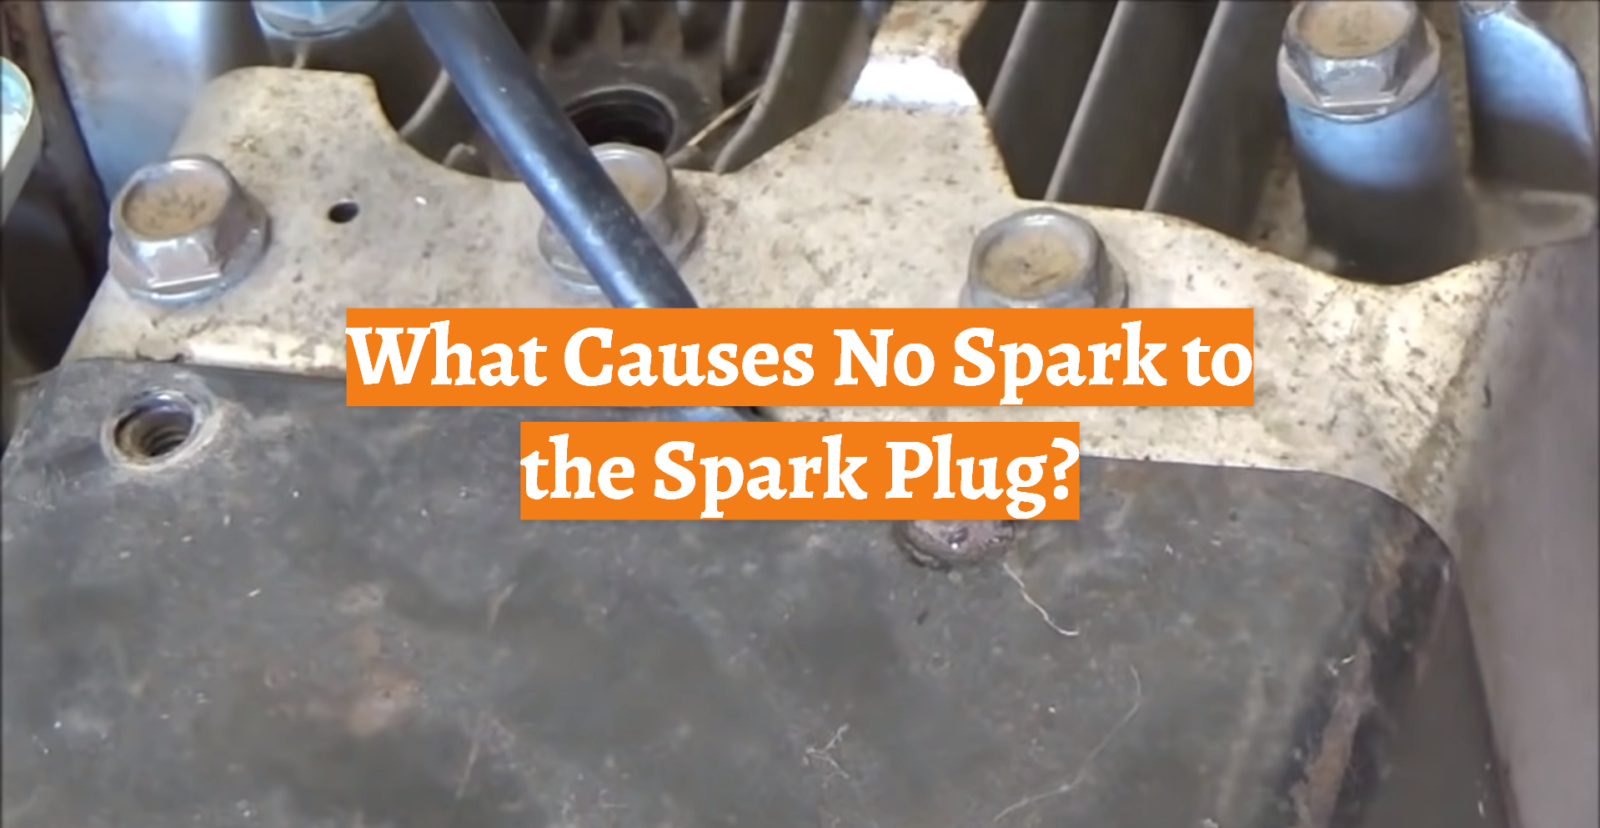 What Causes No Spark to the Spark Plug?